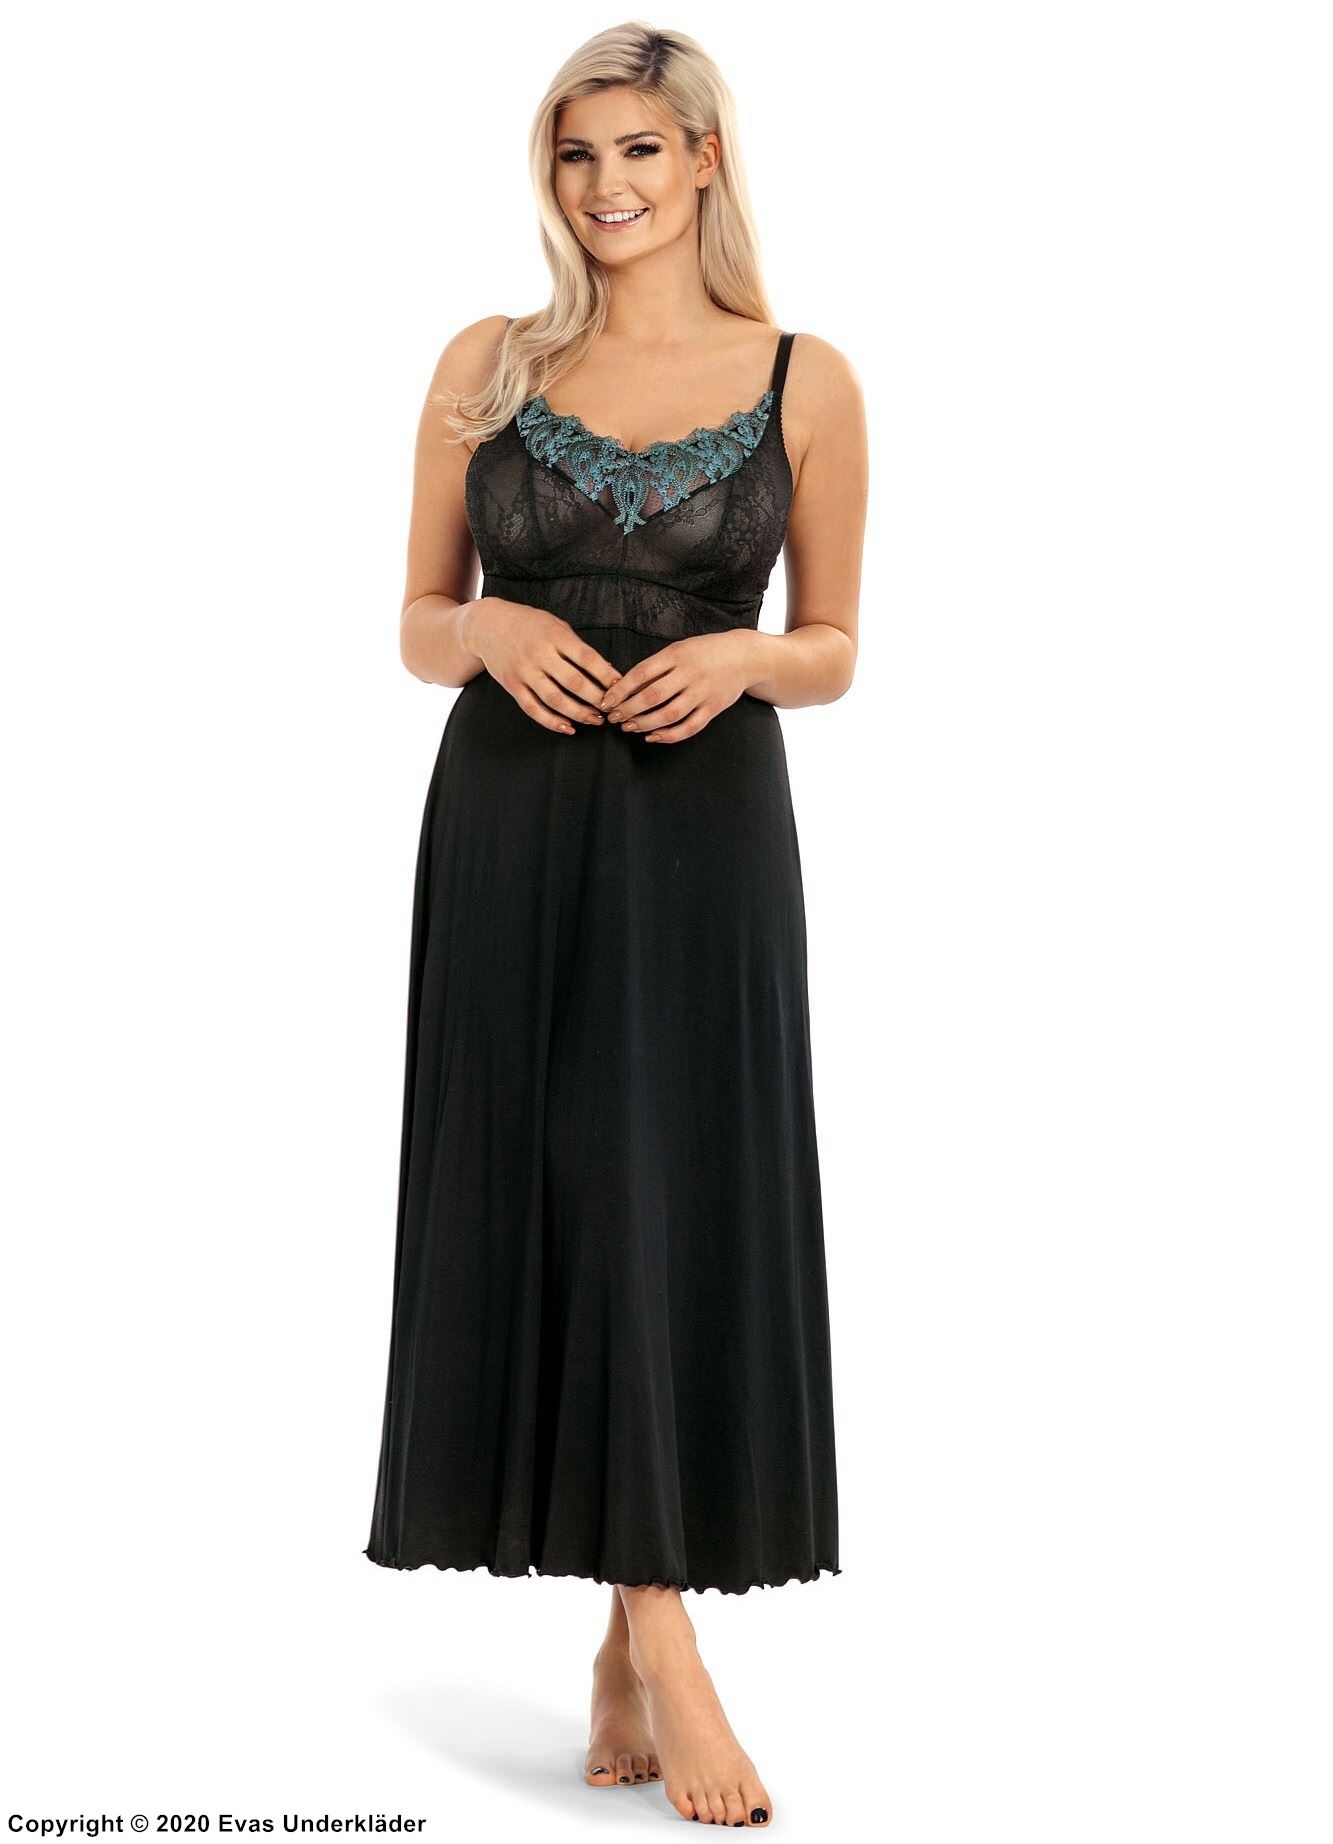 Elegant nightdress, embroidery, lace overlay, sheer inlay